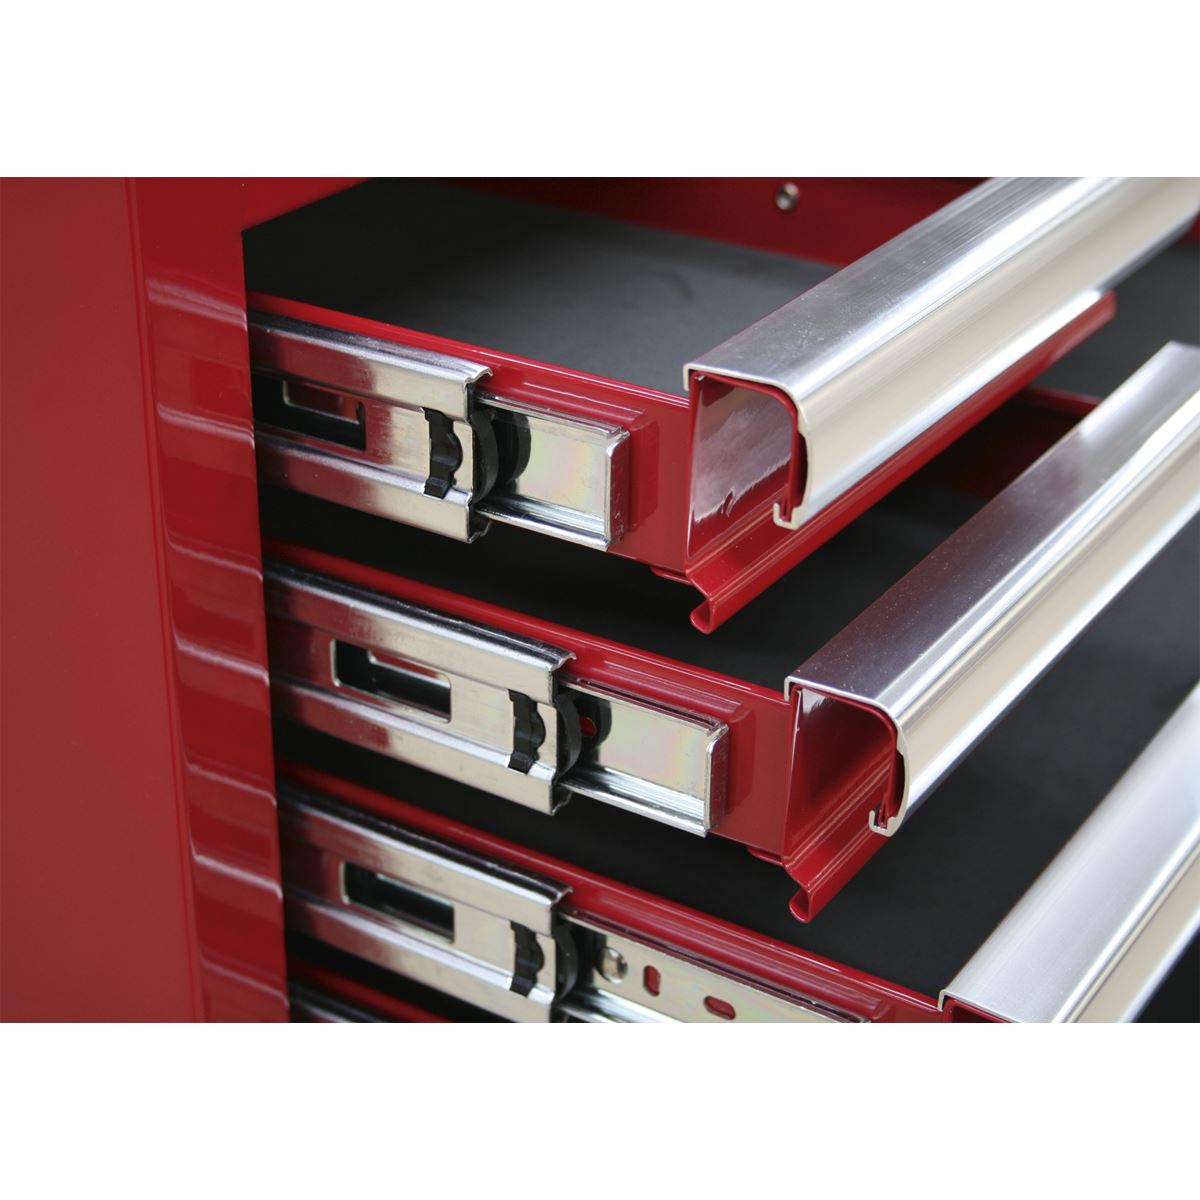 Sealey Superline Pro Topchest 6 Drawer with Ball-Bearing Slides - Red